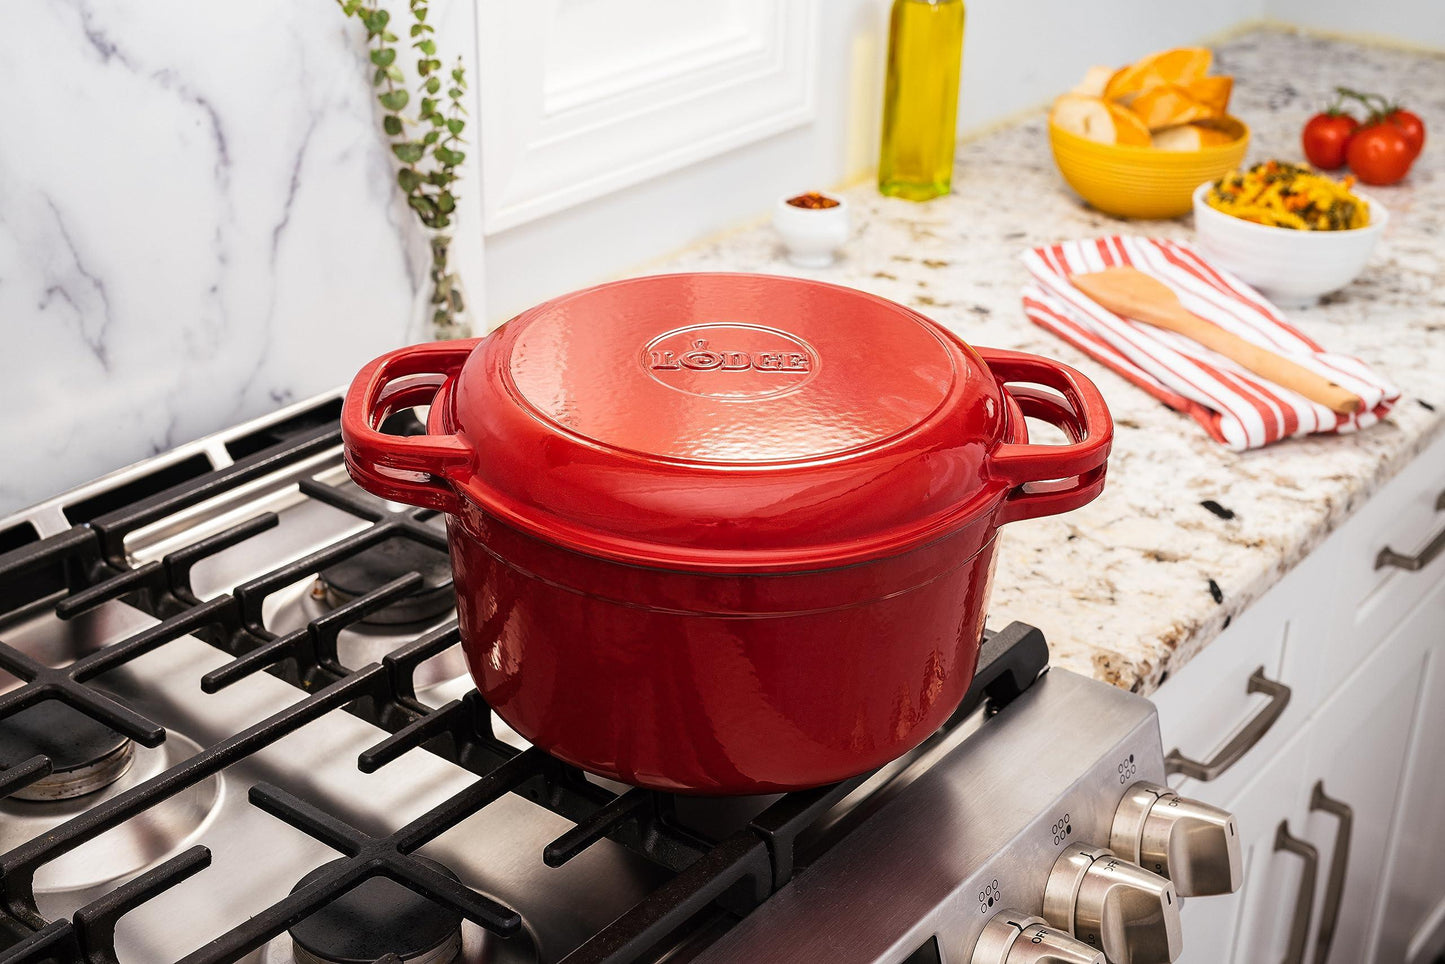 Lodge 7 Quart Essential Enameled Cast Iron Double Dutch Oven- Dual Handles – Lid Doubles as Grill Pan, Oven Safe up to 500° F or on Stovetop - Use to Marinate, Cook, Bake, Refrigerate & Serve – Red - CookCave